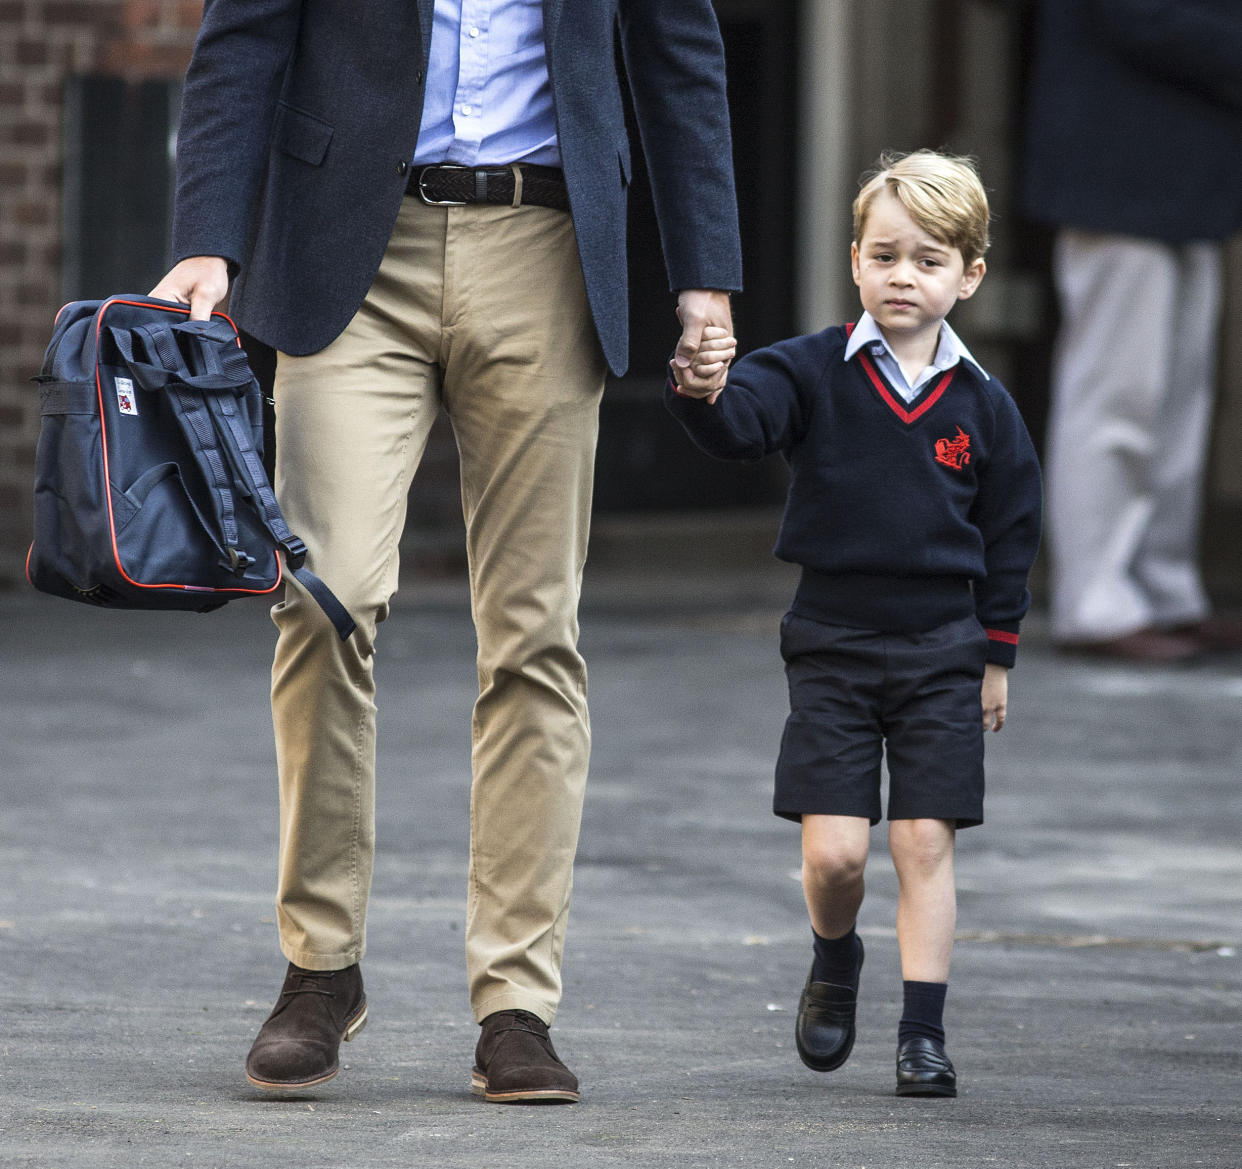 Will the Duke and Duchess of Cambridge break with royal tradition to send Prince George to a co-ed secondary school? [Photo: PA]